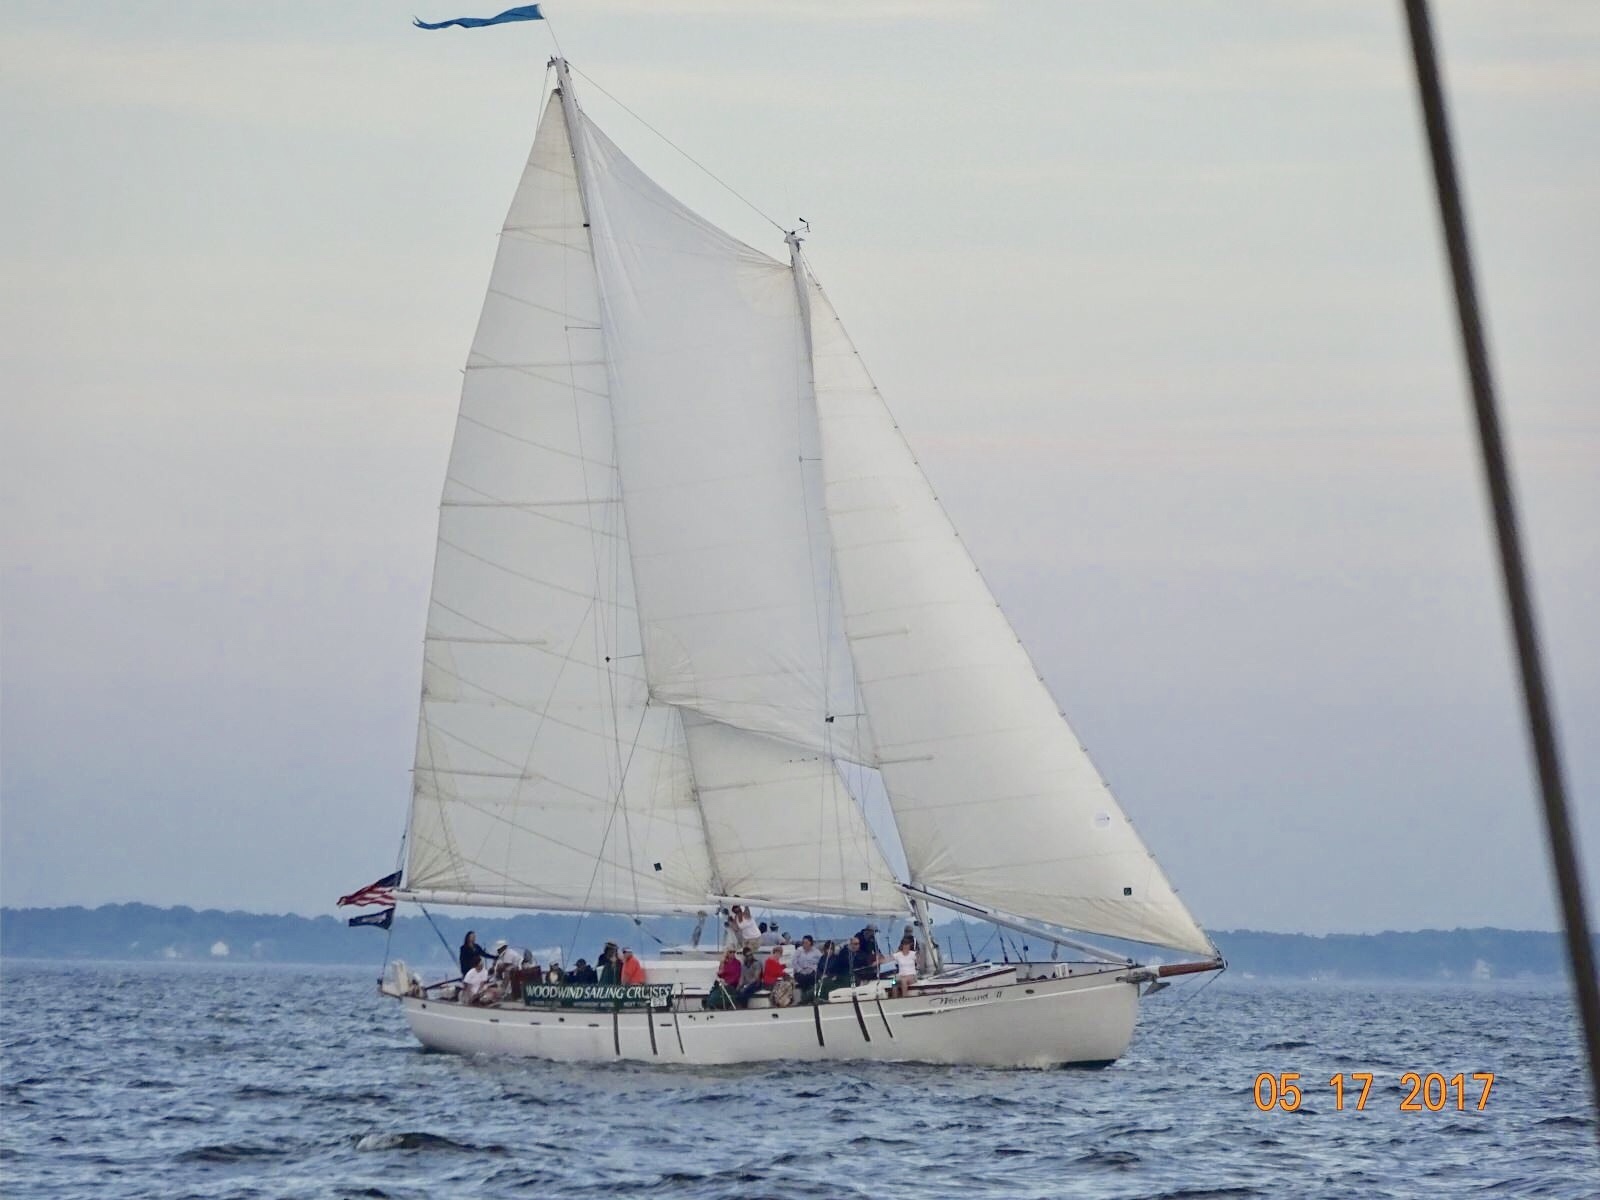 Schooner flying with sails full of wind